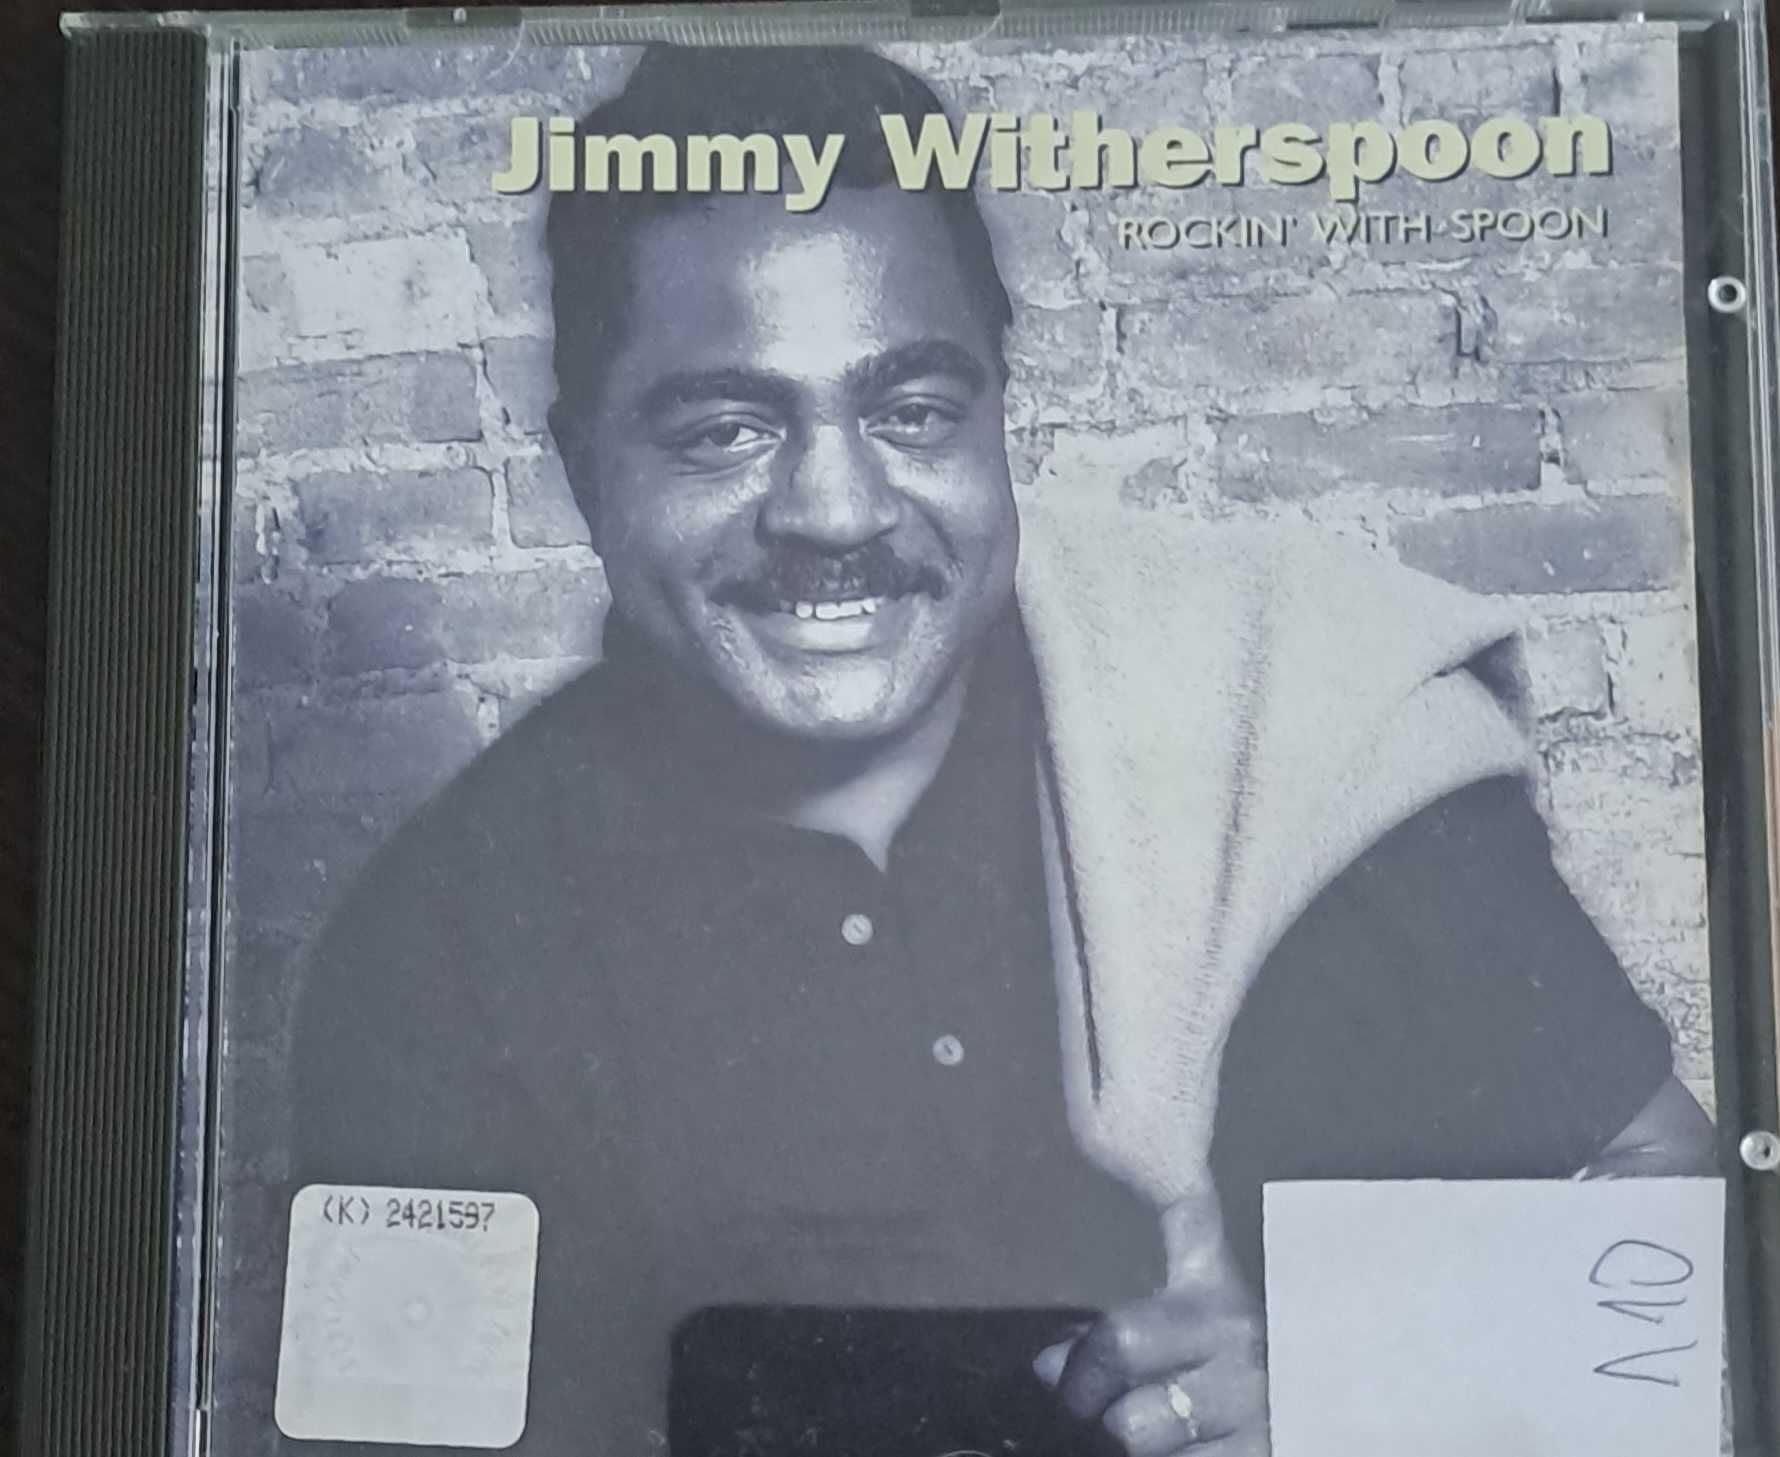 Jimmy Witherspoon - "Rockin' With Spoon"